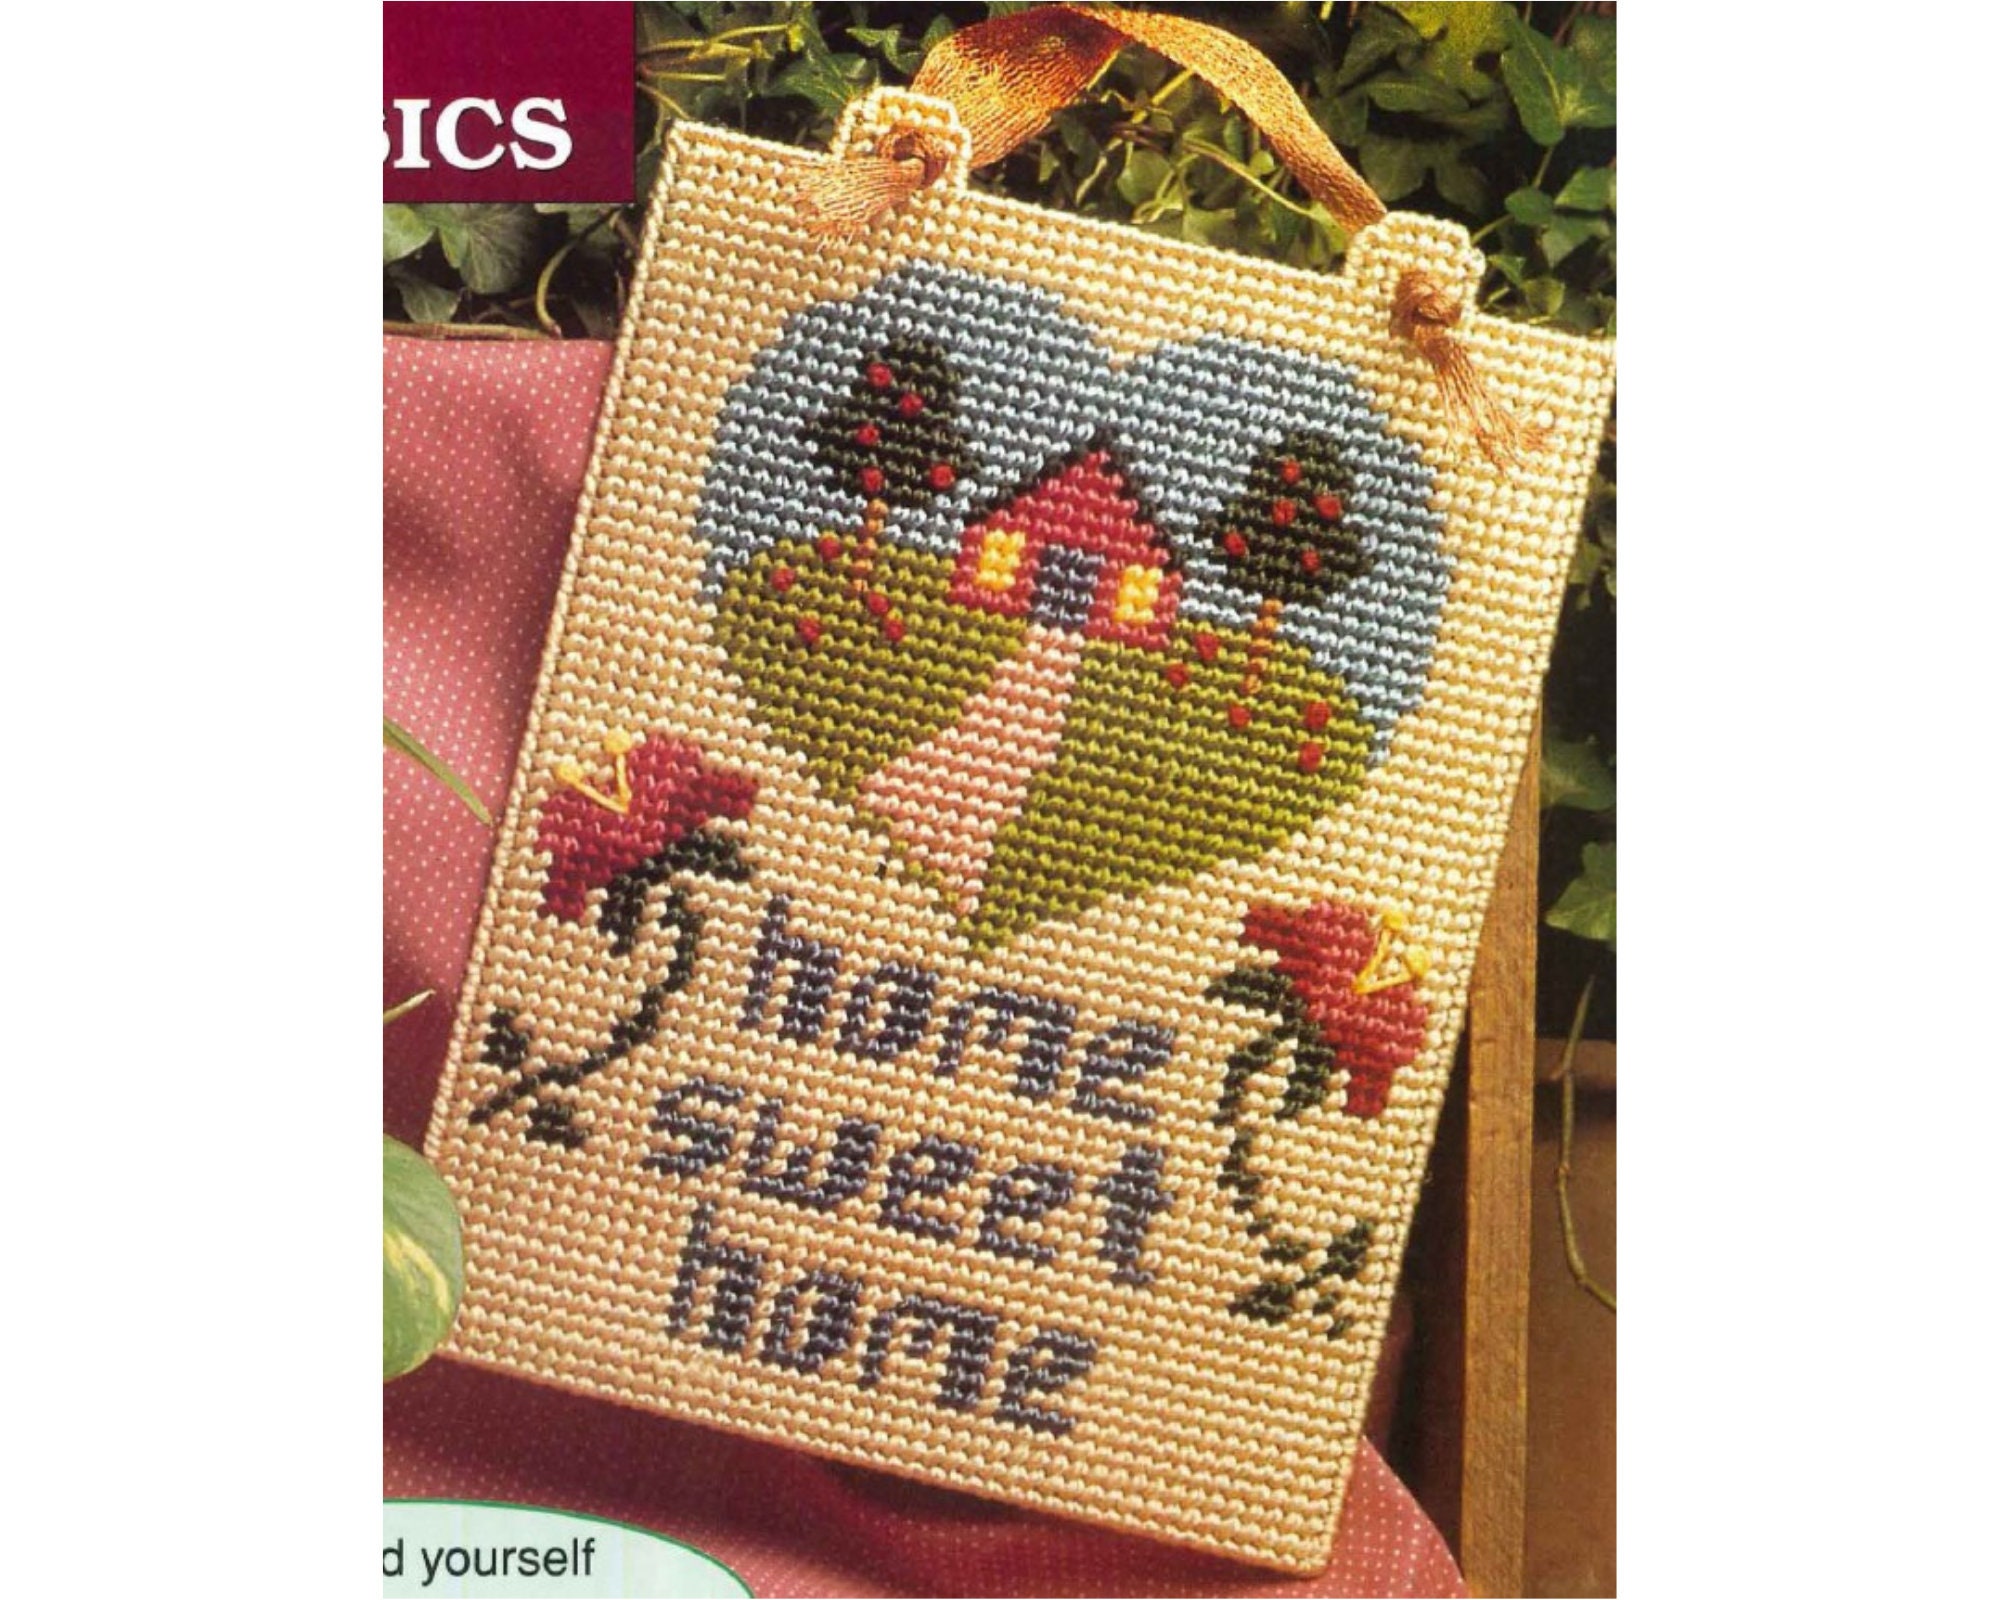 Decorative Weaved Canvas 2PC Wall Hanging 'home sweet home' & Striped Home Decor